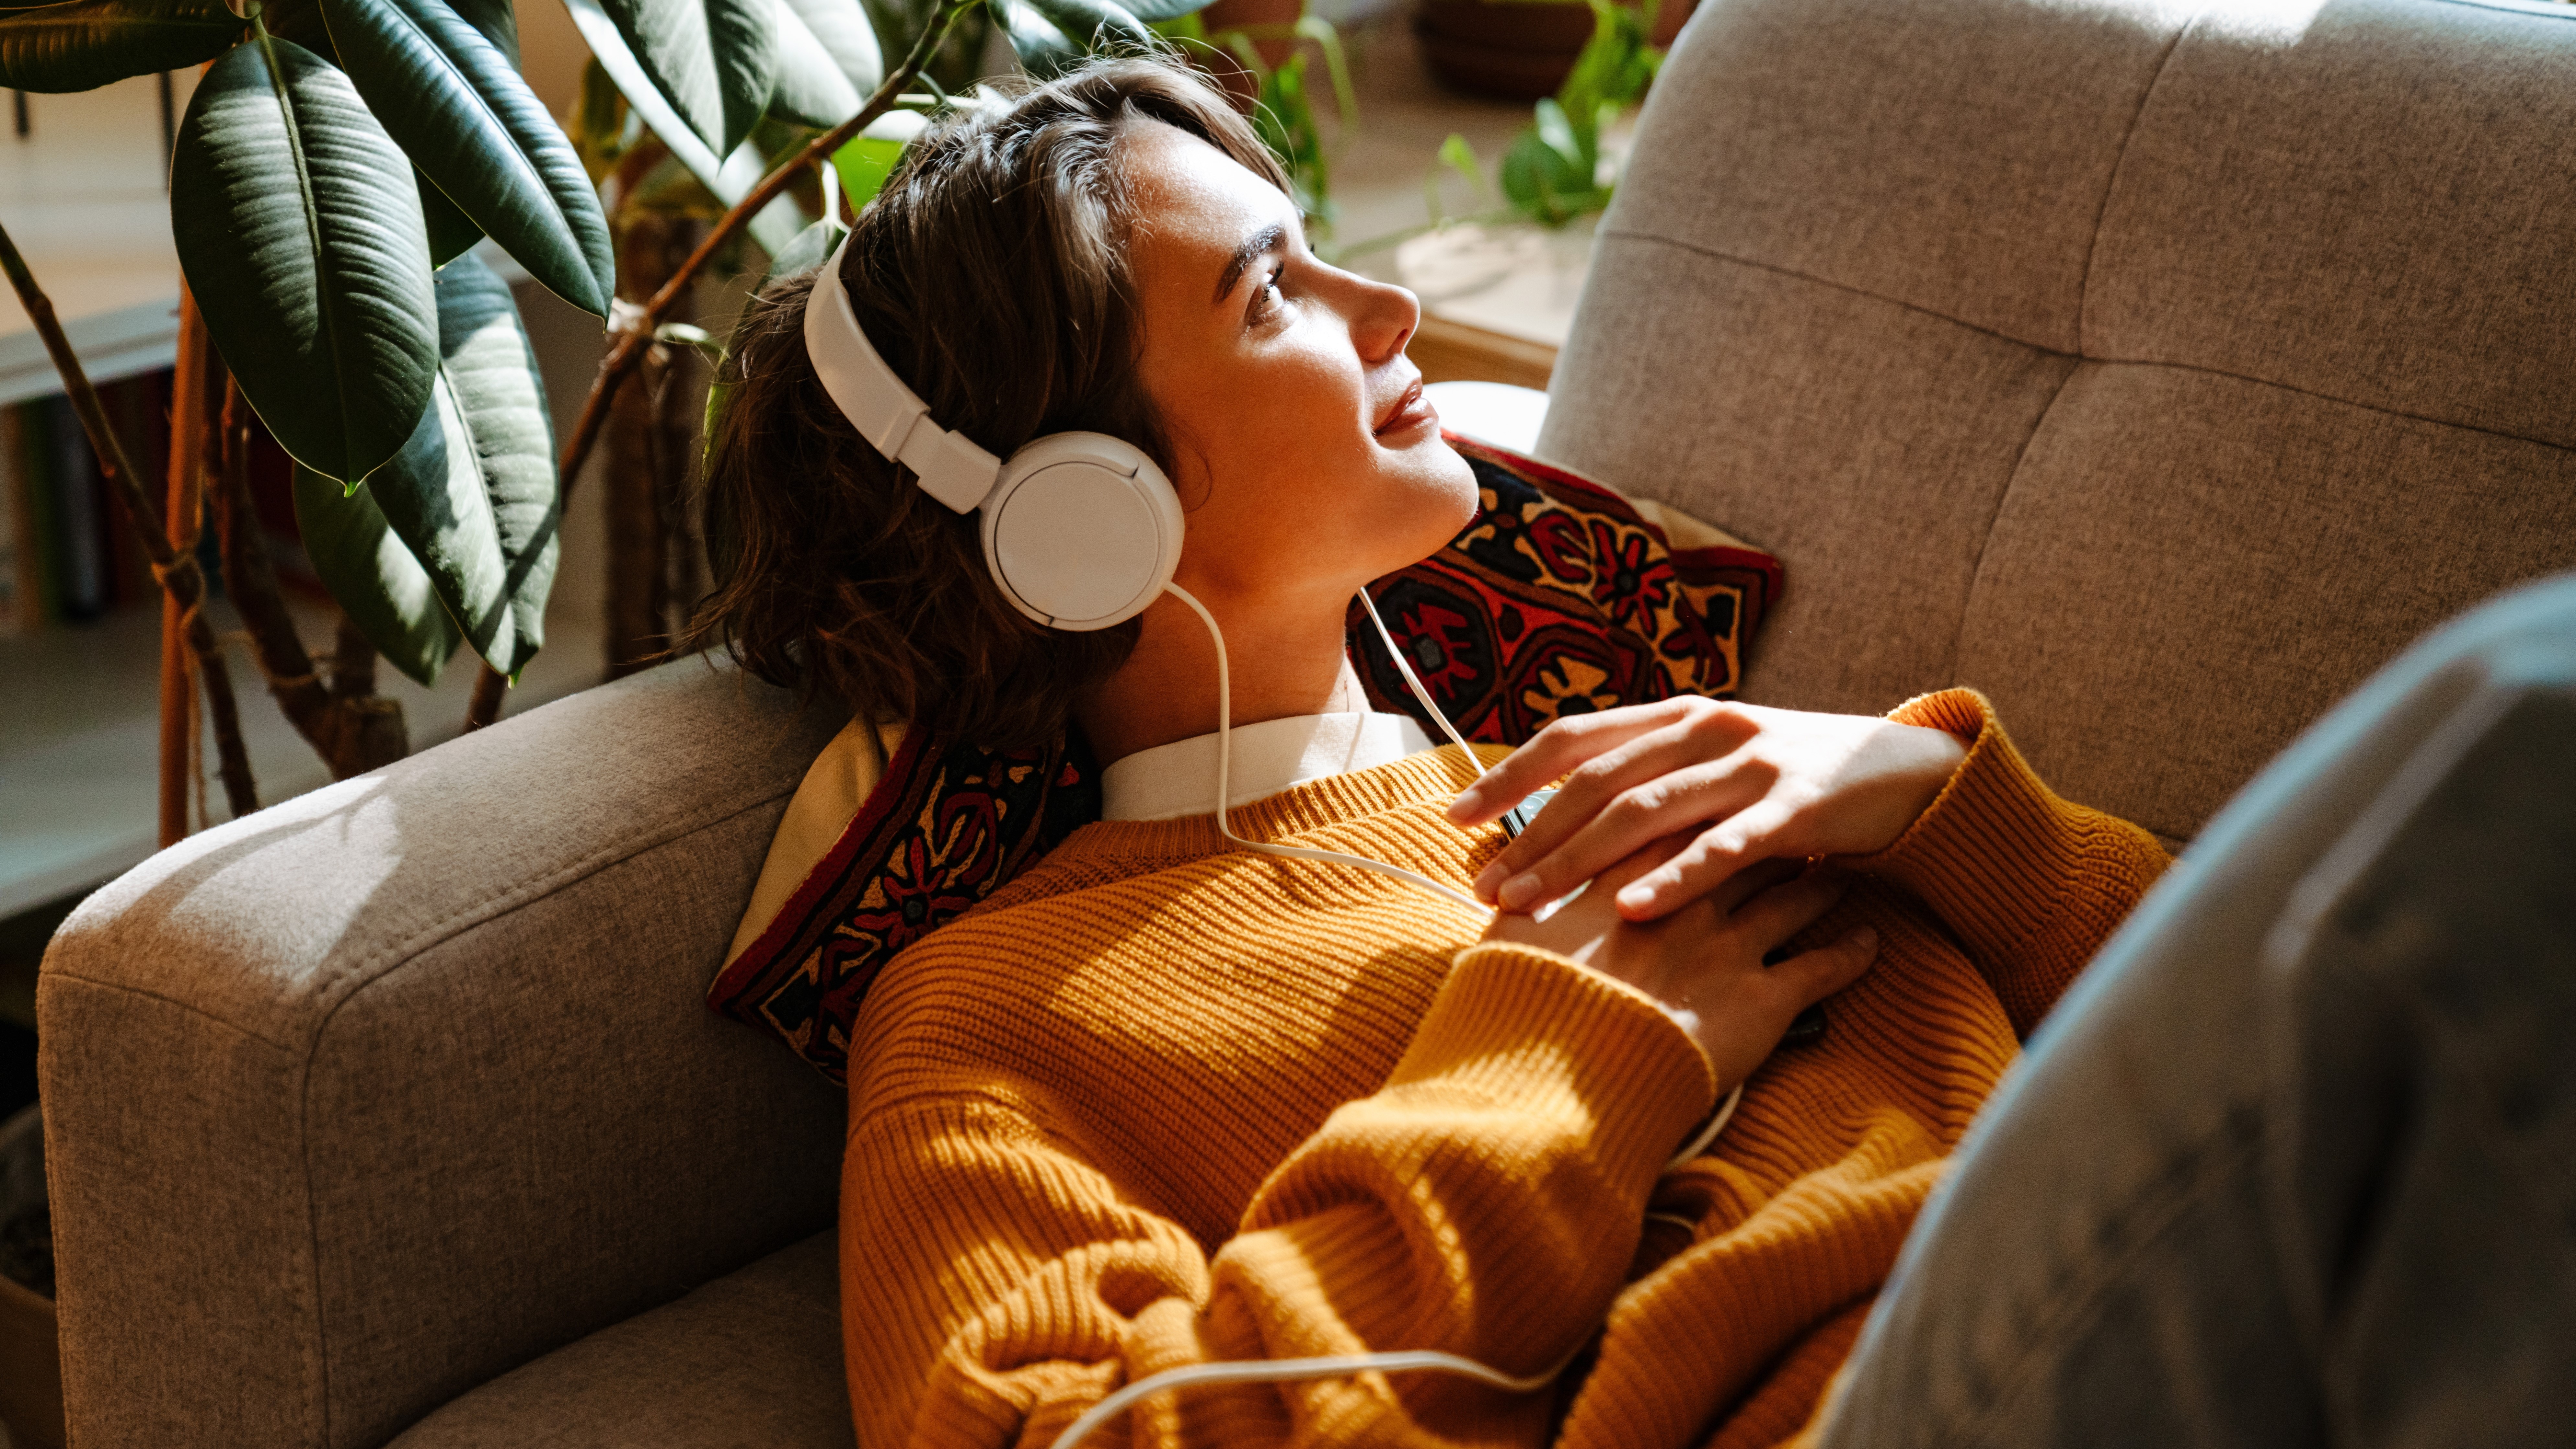 Woman listening music on her headphones while resting on couch and holding her phone and looking out in the distance